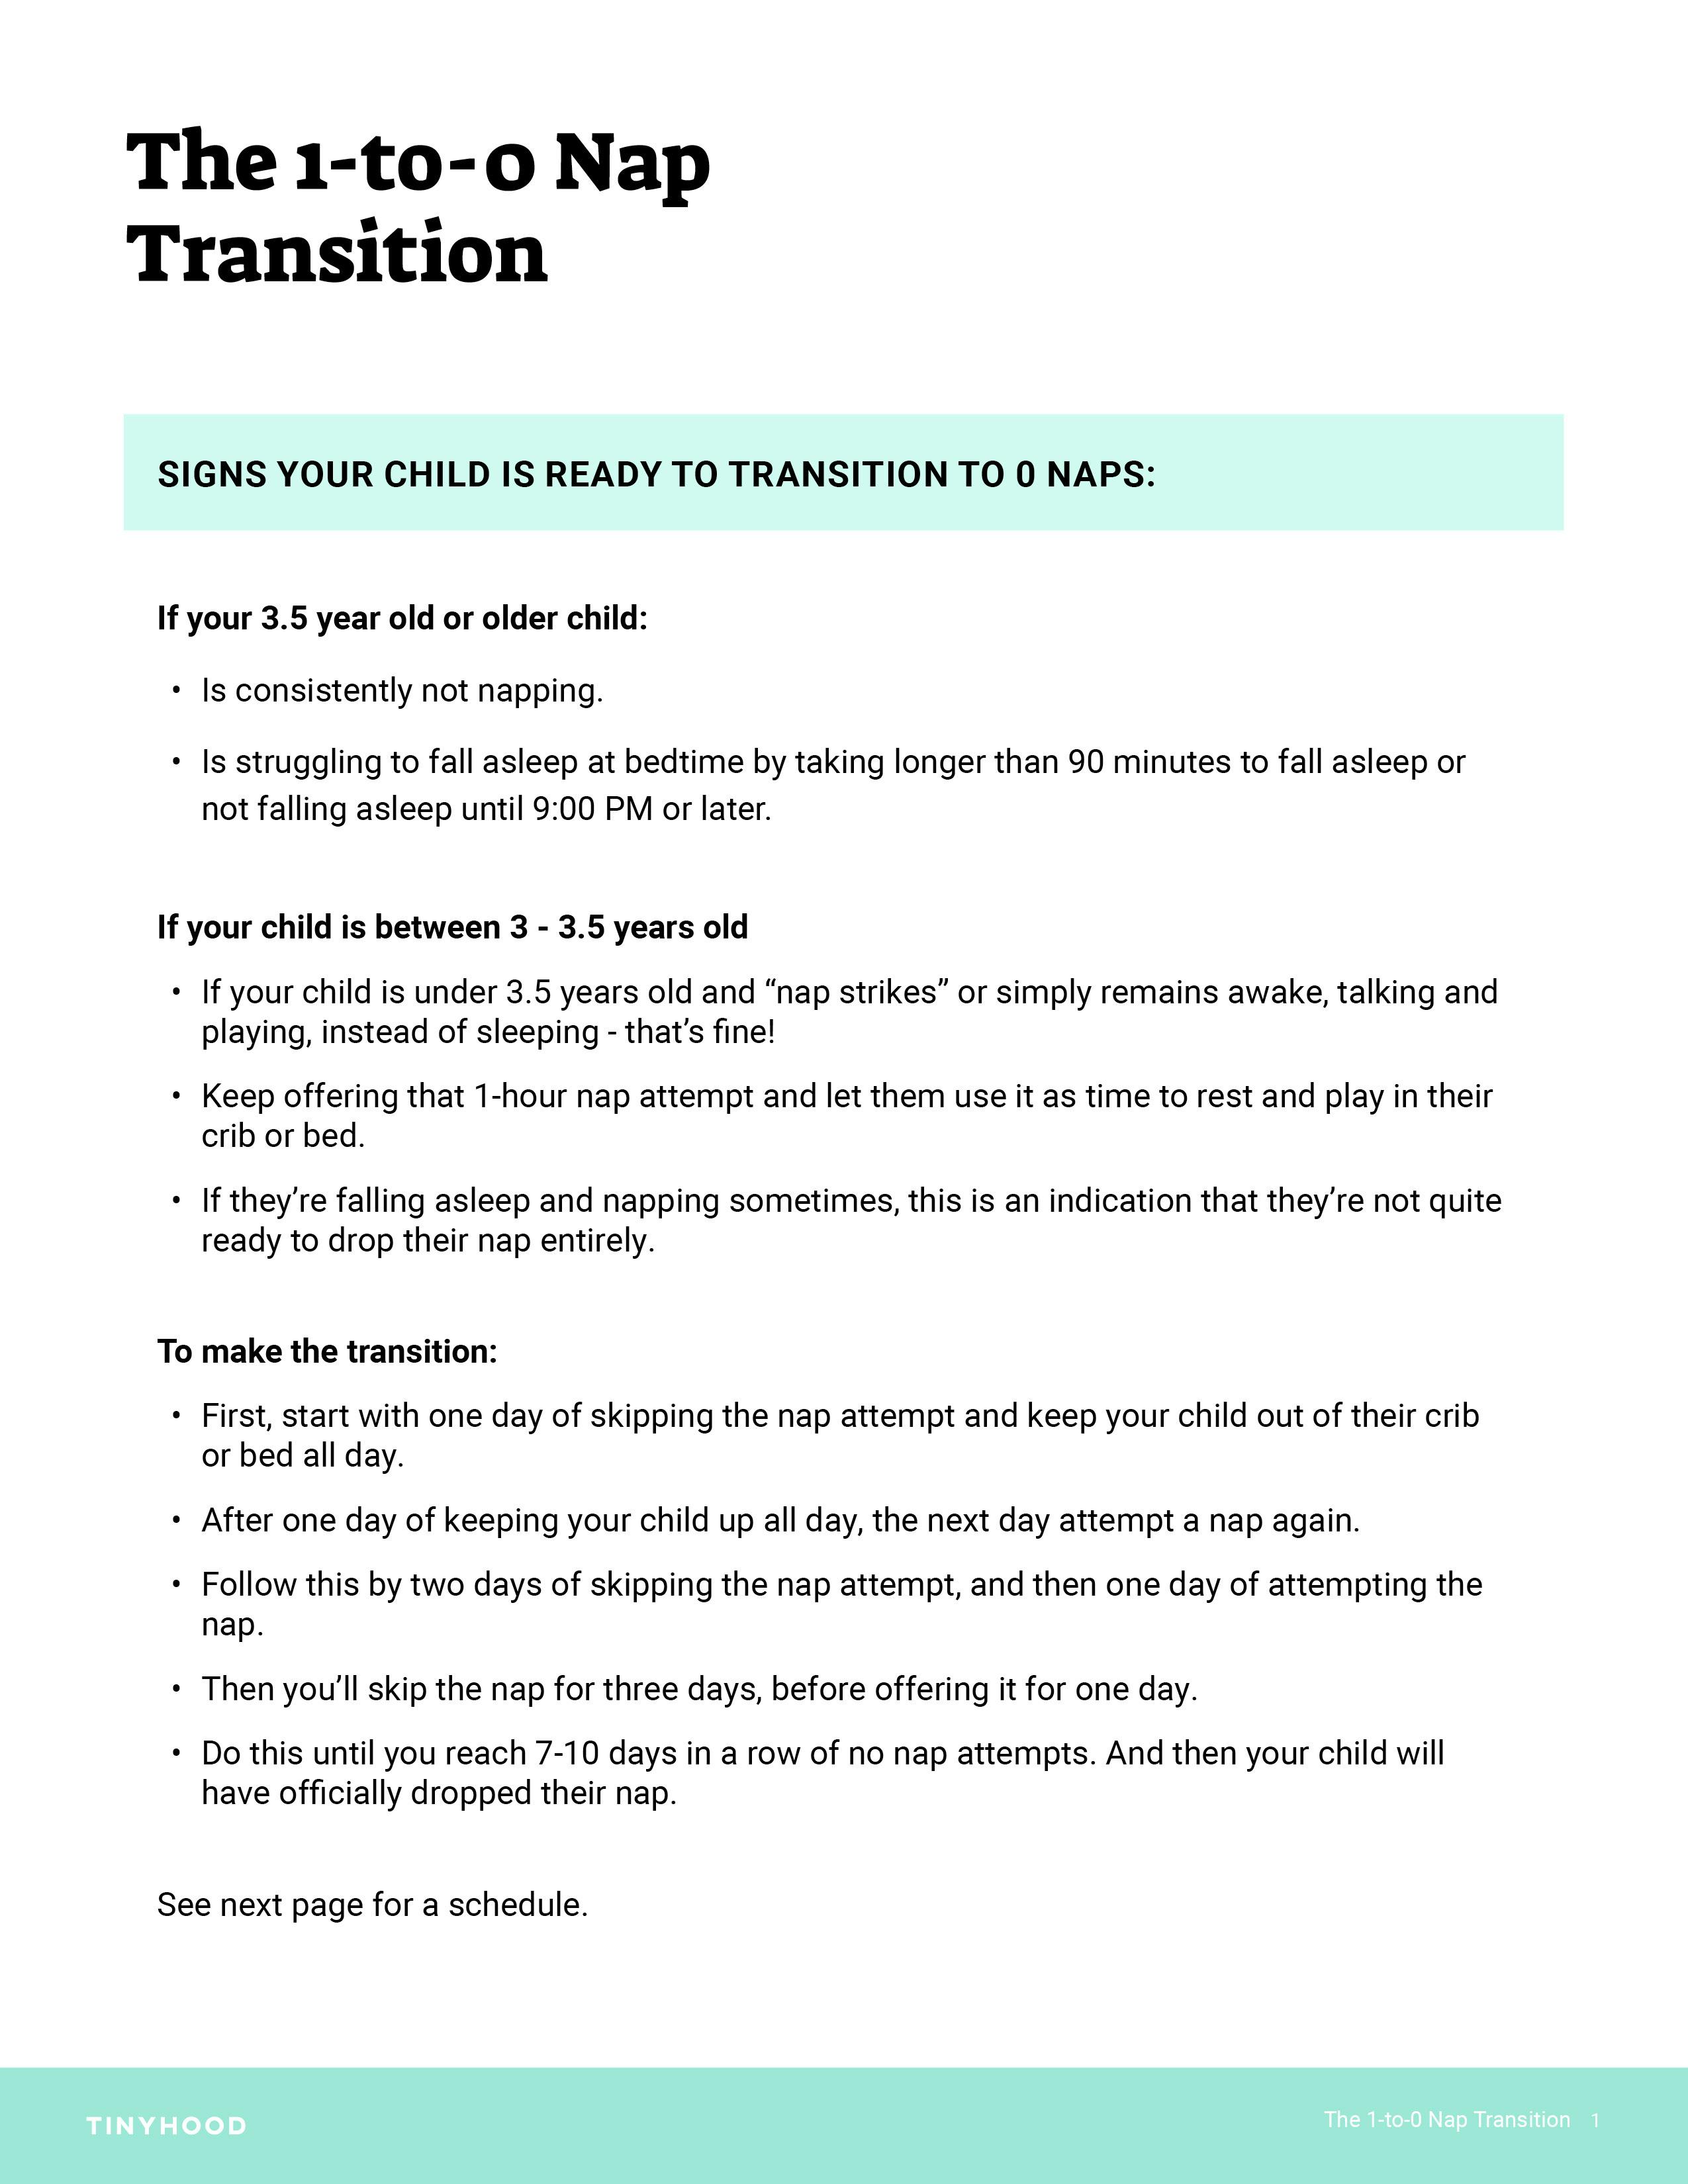 Preview image of Handout: The 1-to-0 Nap Transition